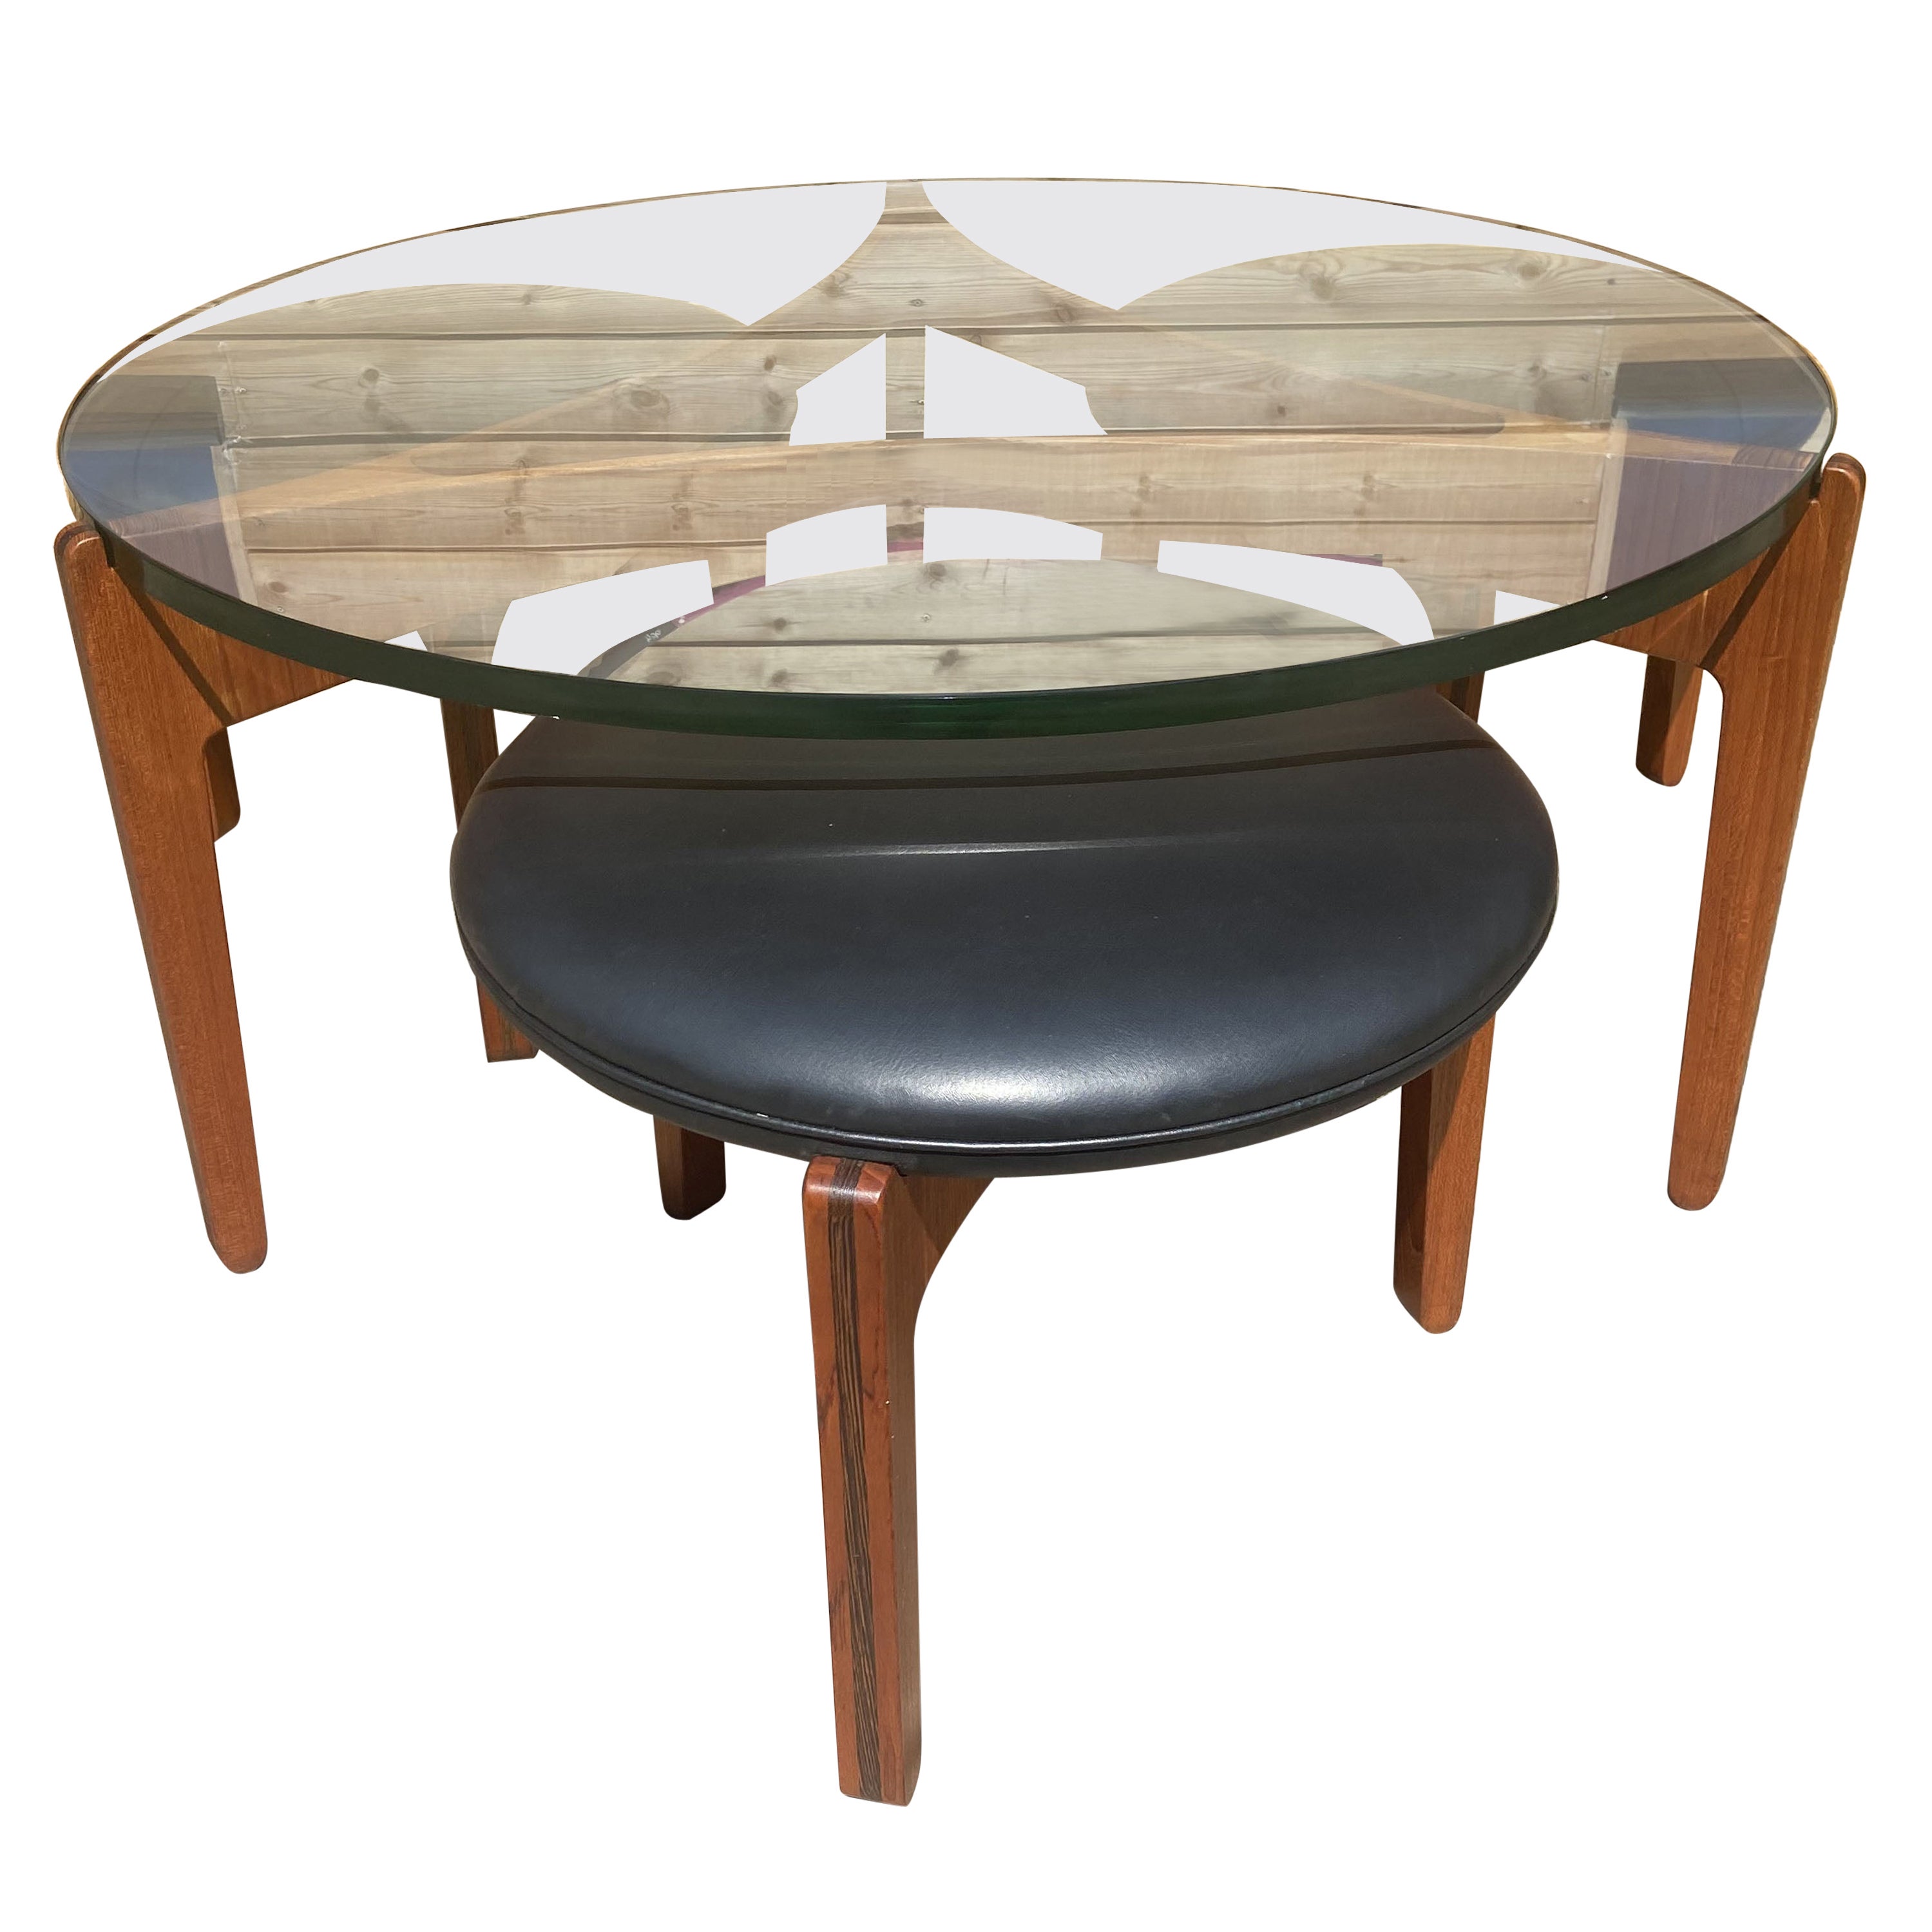 Set of Coffee Table and 3 Stools by Sven Ellekaer for Christian Linneberg